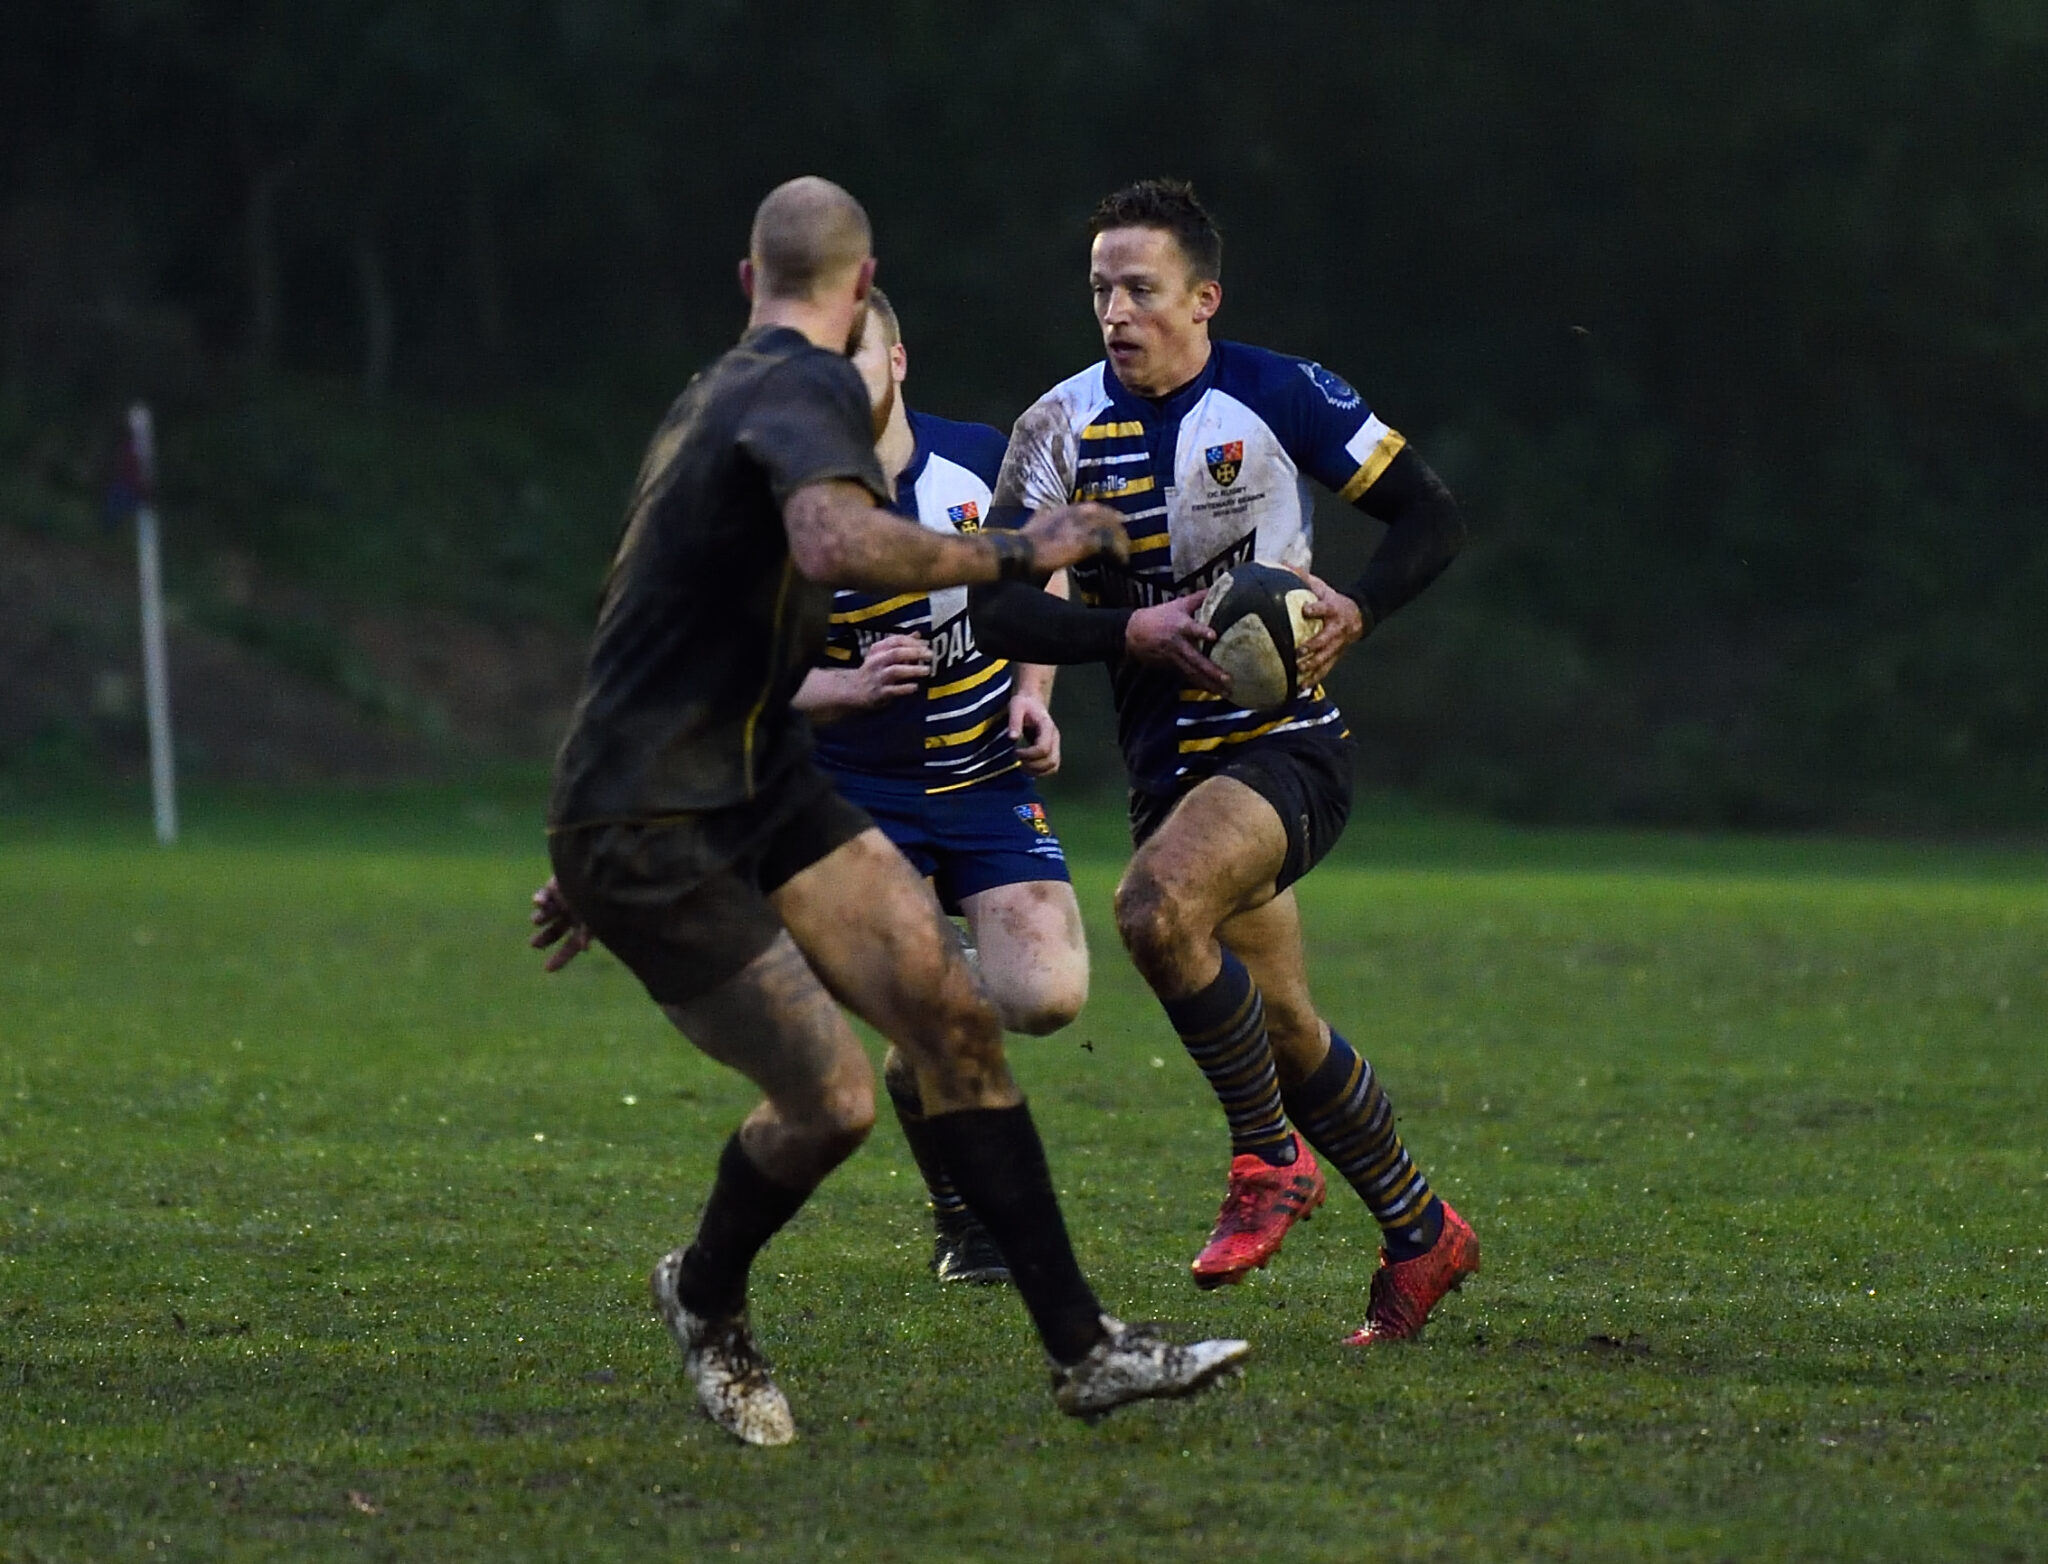 Lighting up OC rugby - Old Cranleighan Society